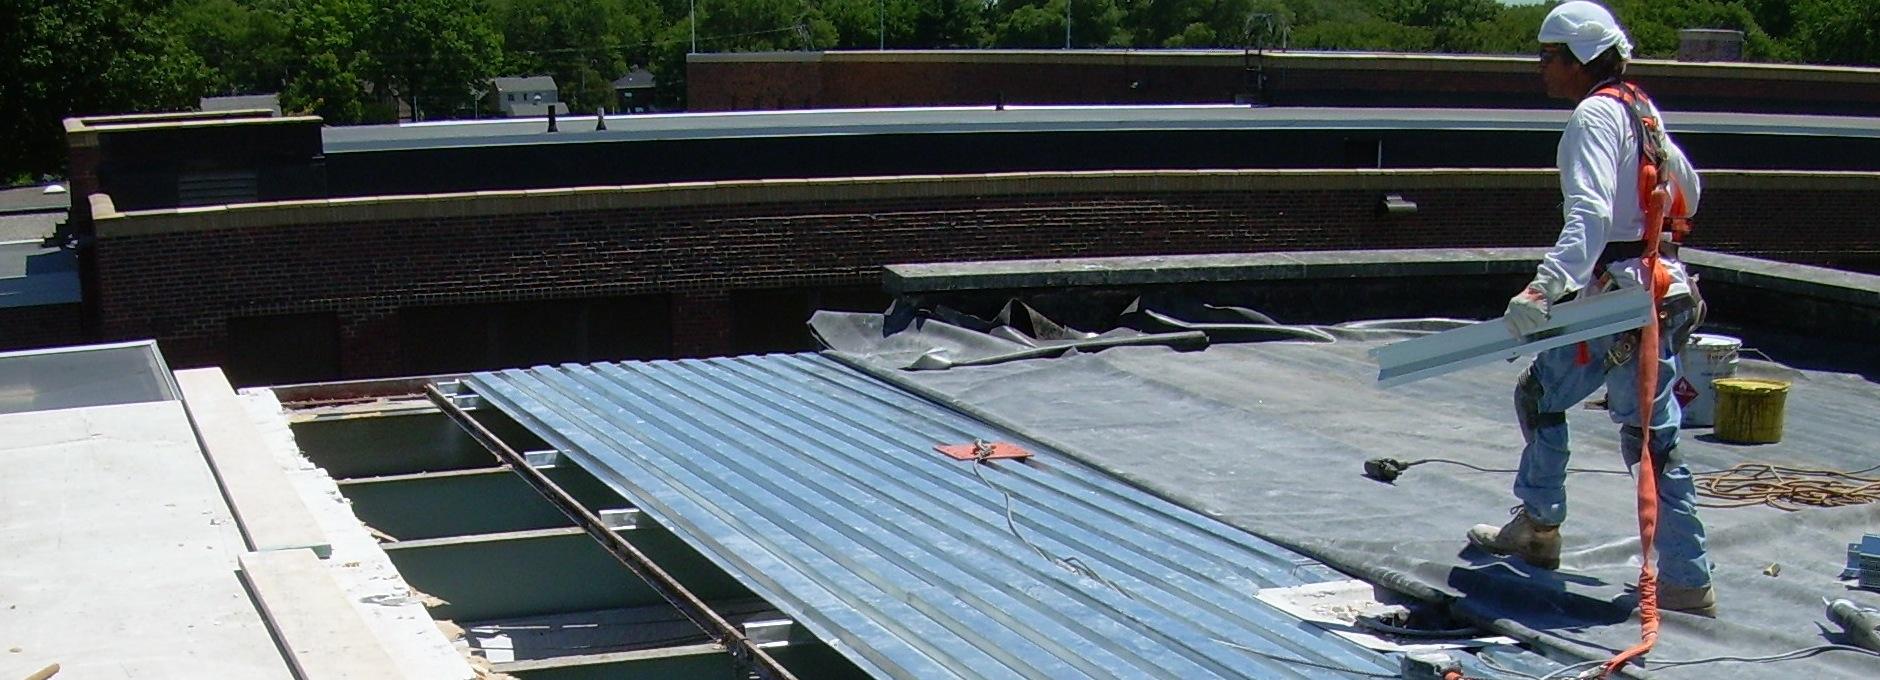 Commercial Roofing For The Ottawa Hills High School Near Toledo With Time and Budget To Spare